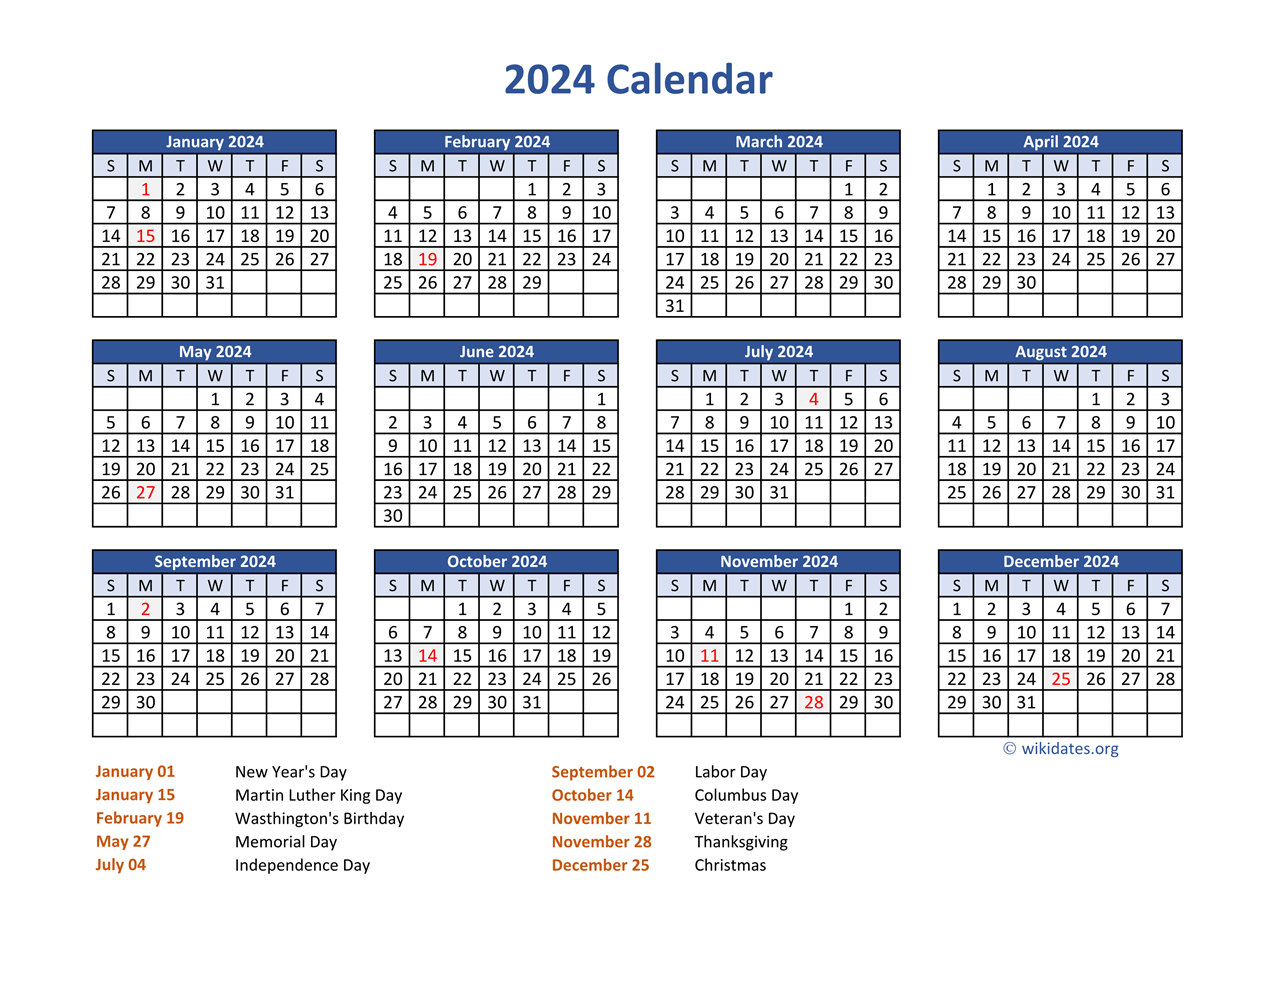 Pdf Calendar 2024 With Federal Holidays | Wikidates for Printable Calendar For 2024 With Holidays